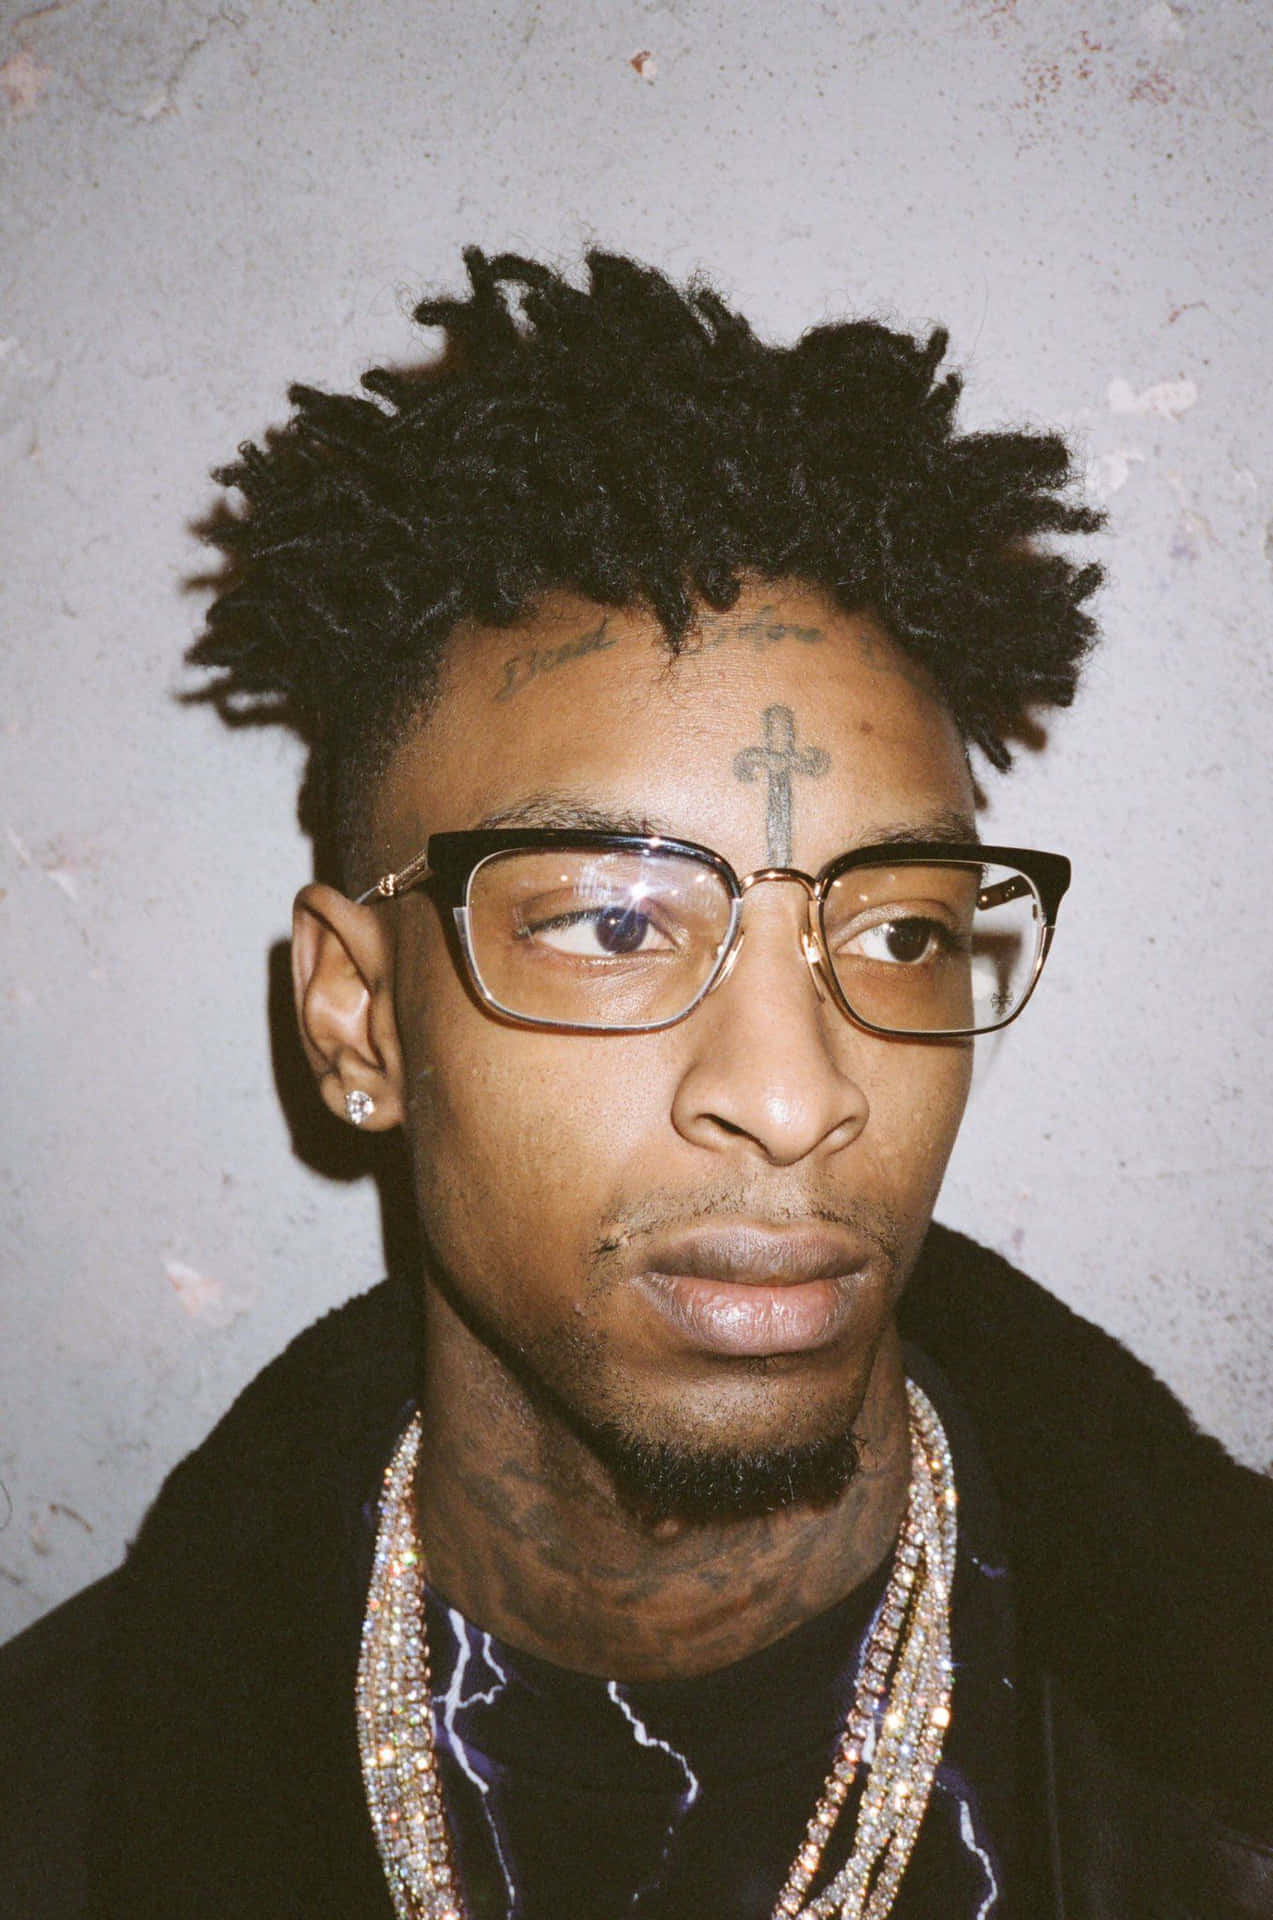 Rapper and Songwriter 21 Savage